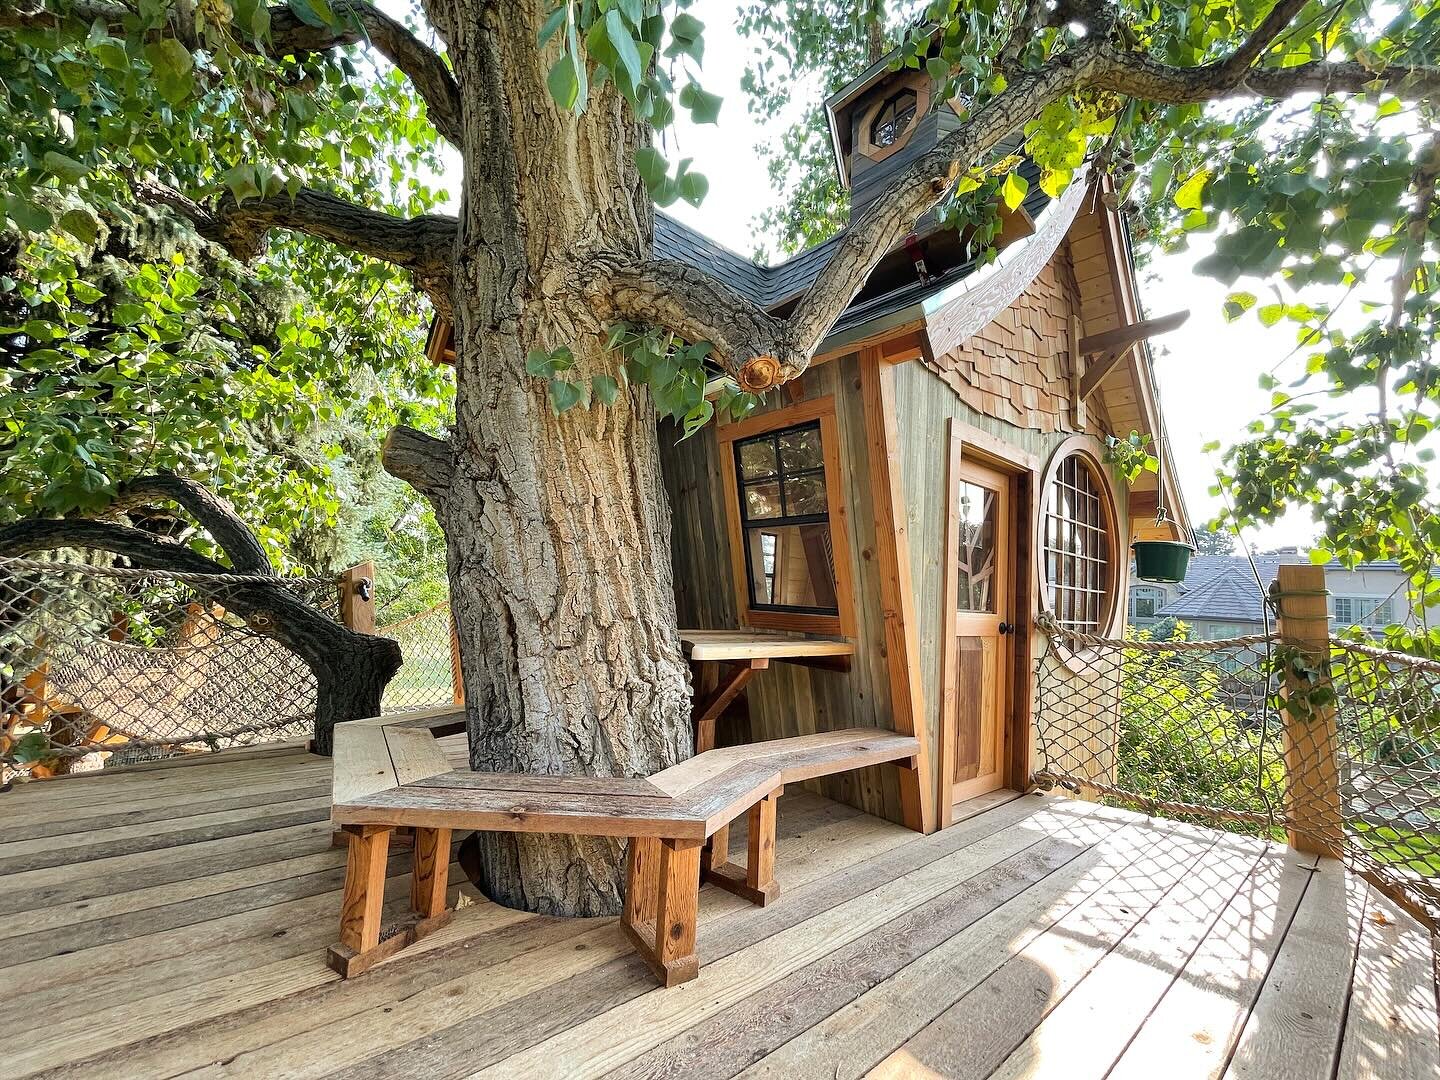 Looking forward to summer treehouse time as the days start to get longer, little by little.  Throwback to the Jacklin treehouse ☀️🌲